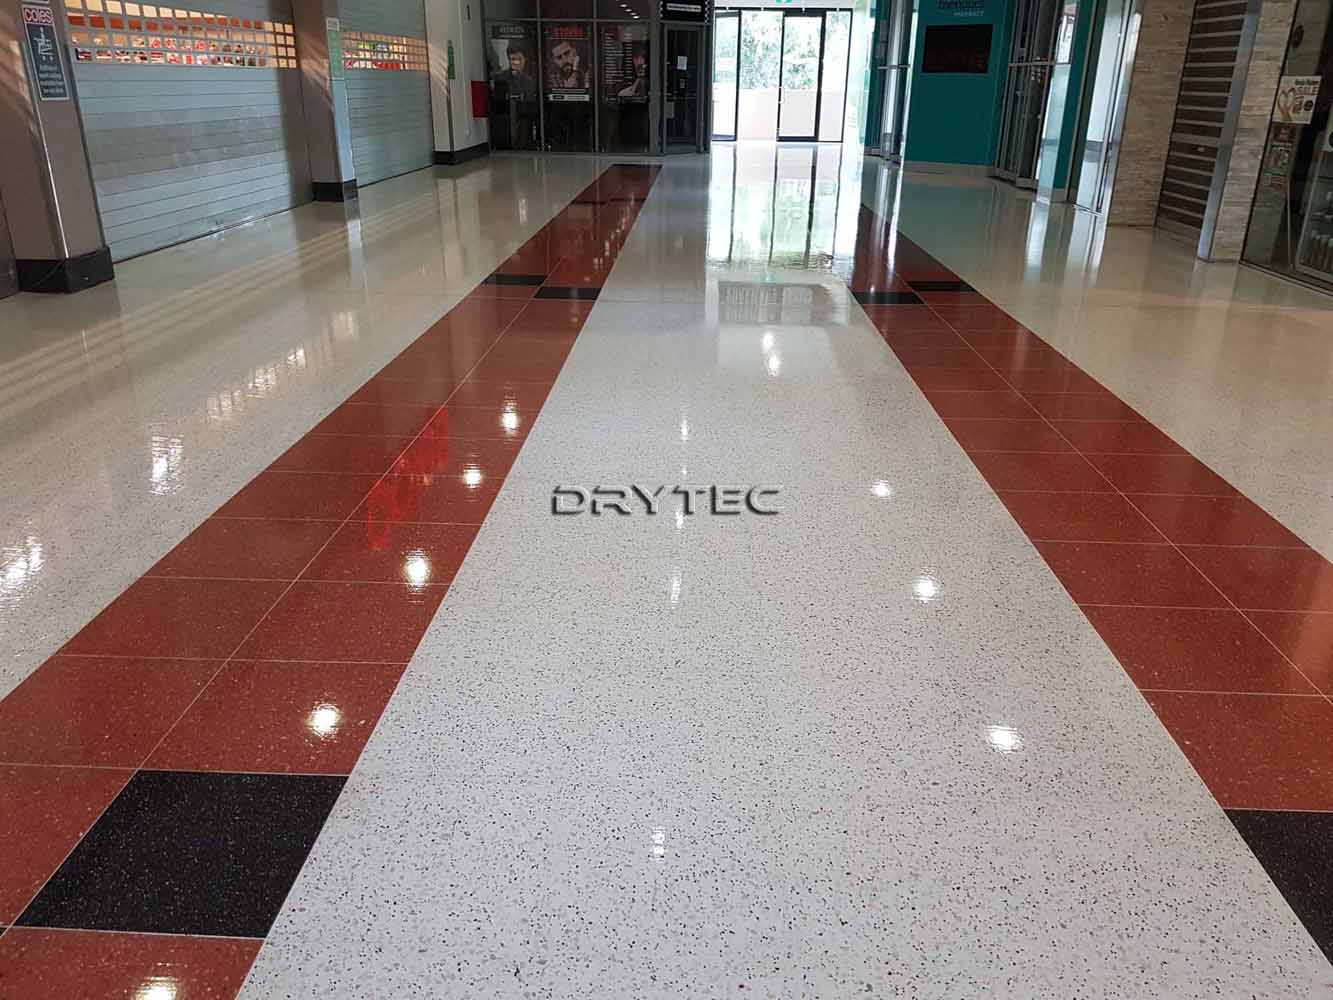 Terrazzo Floor Tiles Restoration-Grinding-Honing-Polishing-Cleaning and Sealing Service in Perth WA